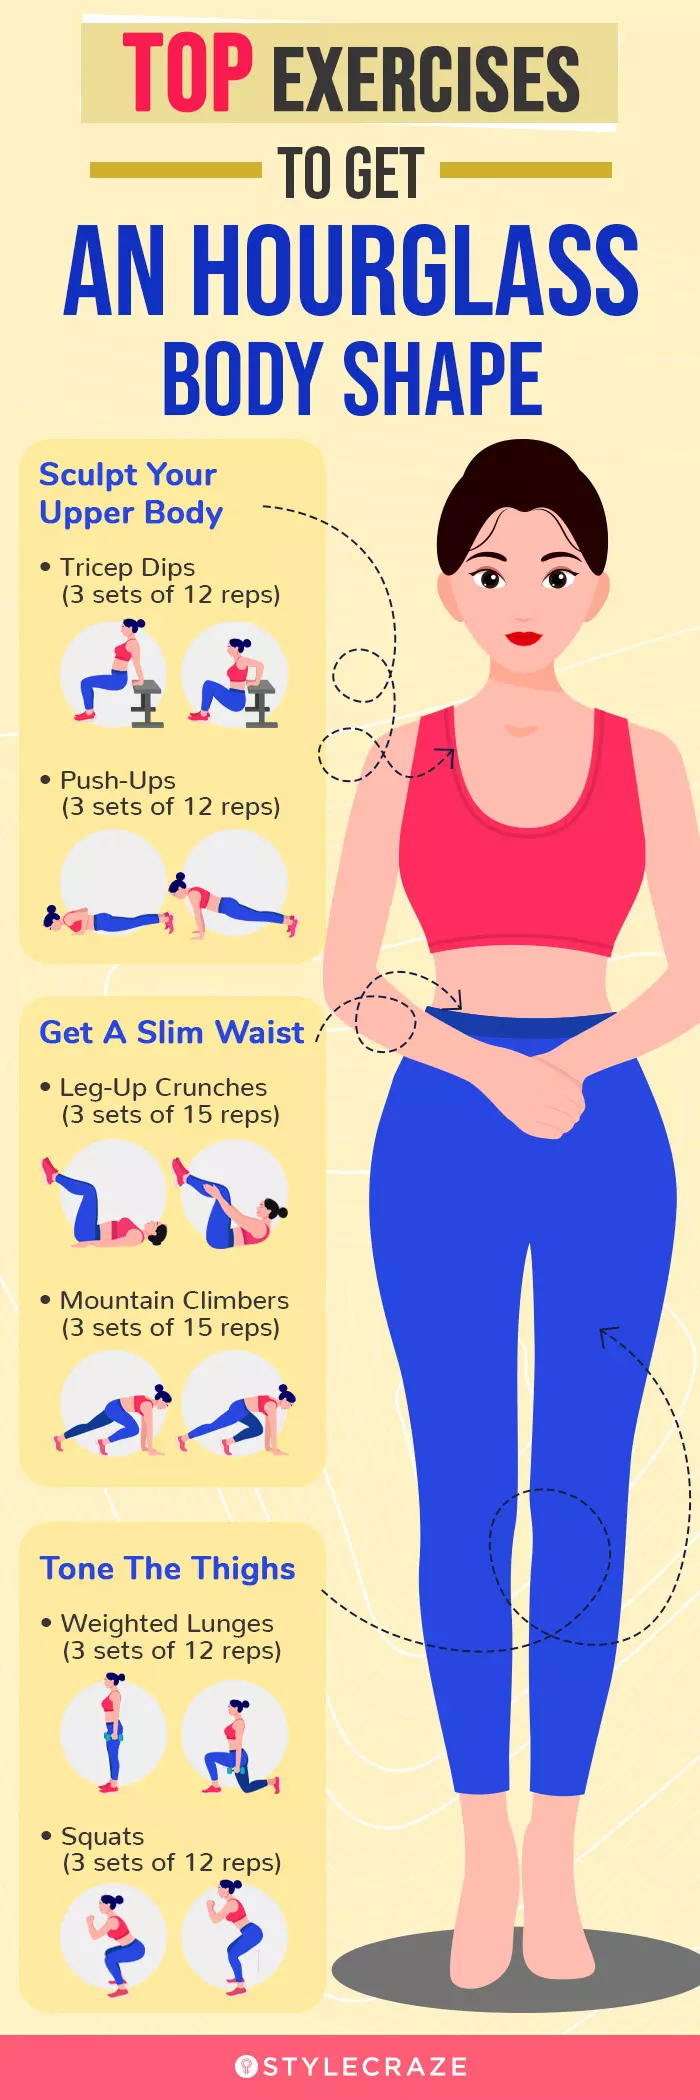 top exercises to get an hourglass body shape (infographic)